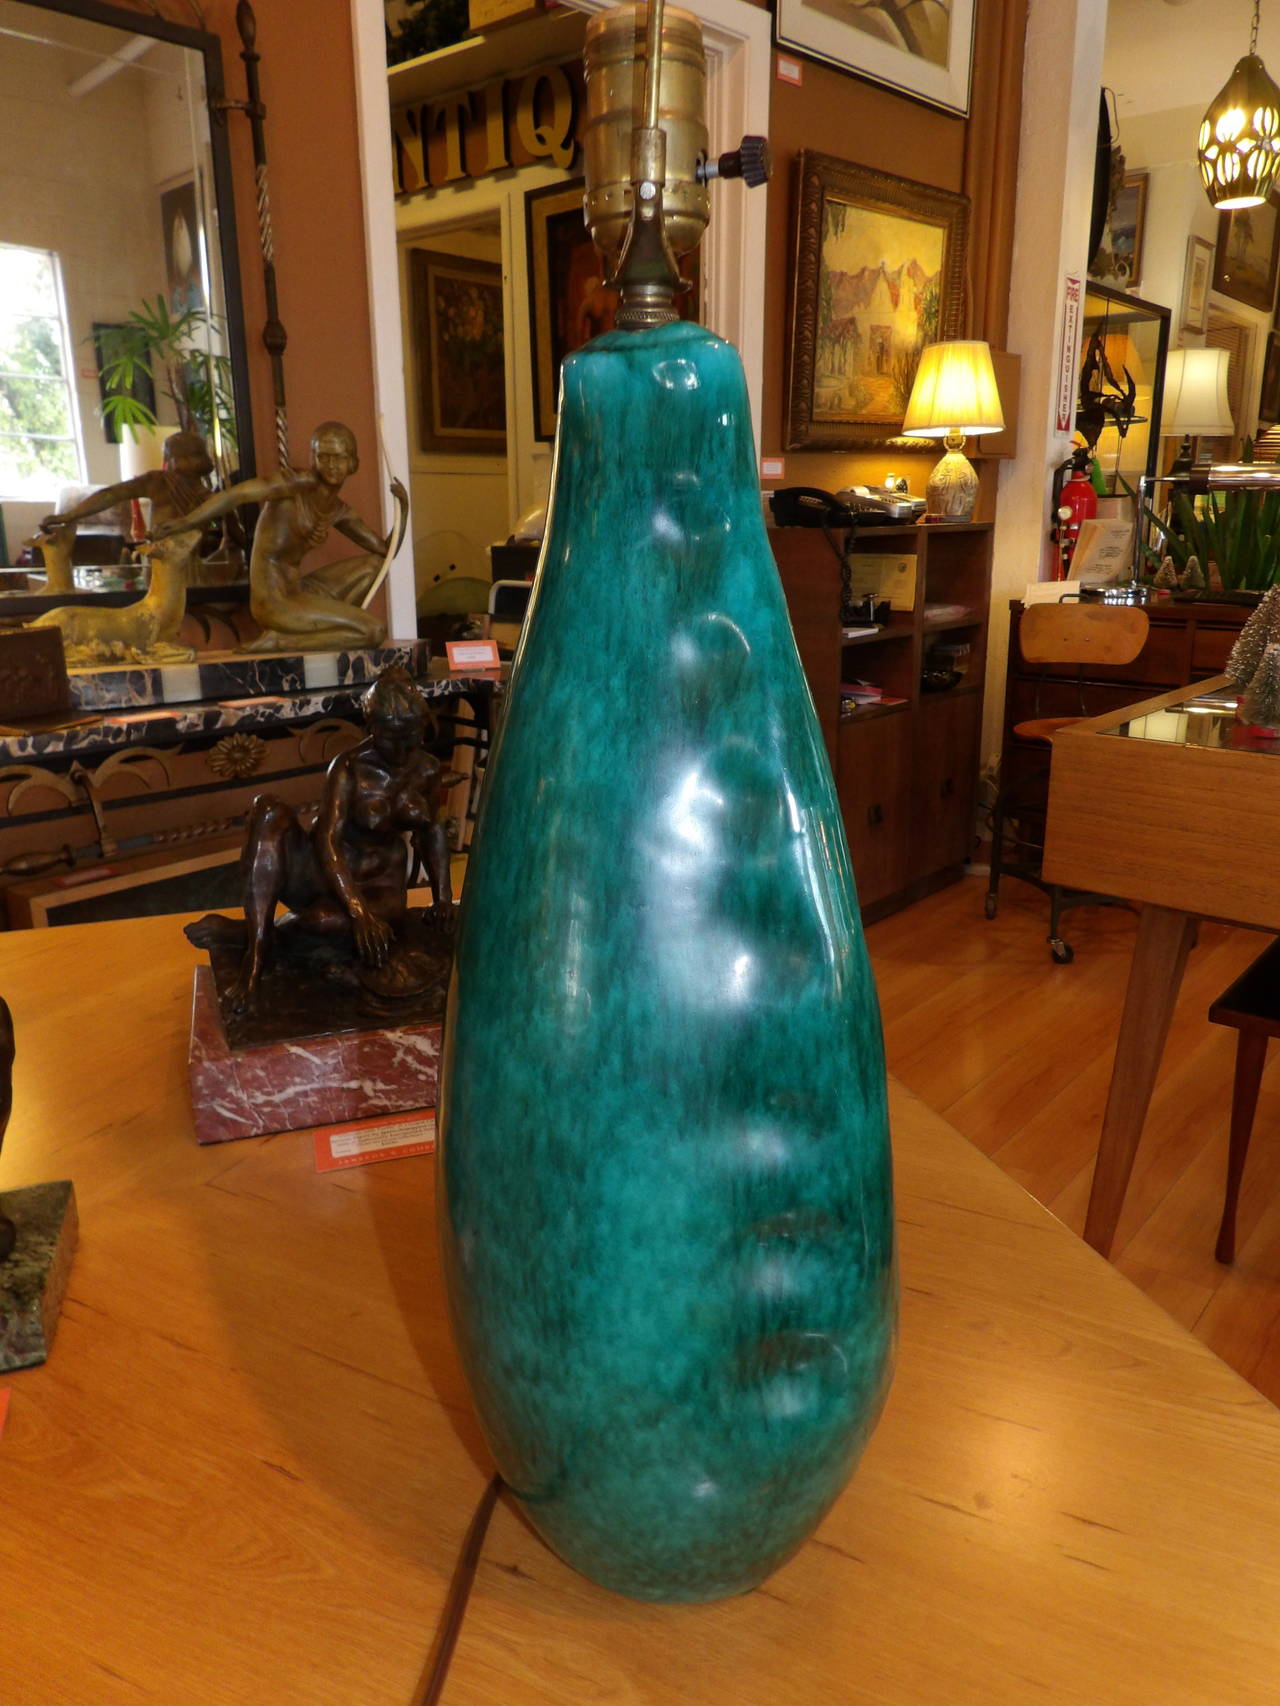 A signed Marcello Fantoni ceramic table lamp with a mottled blue/green glaze. Vintage, handmade shade (missing some threads) optional for cost of shipping. Height to finial measures 30